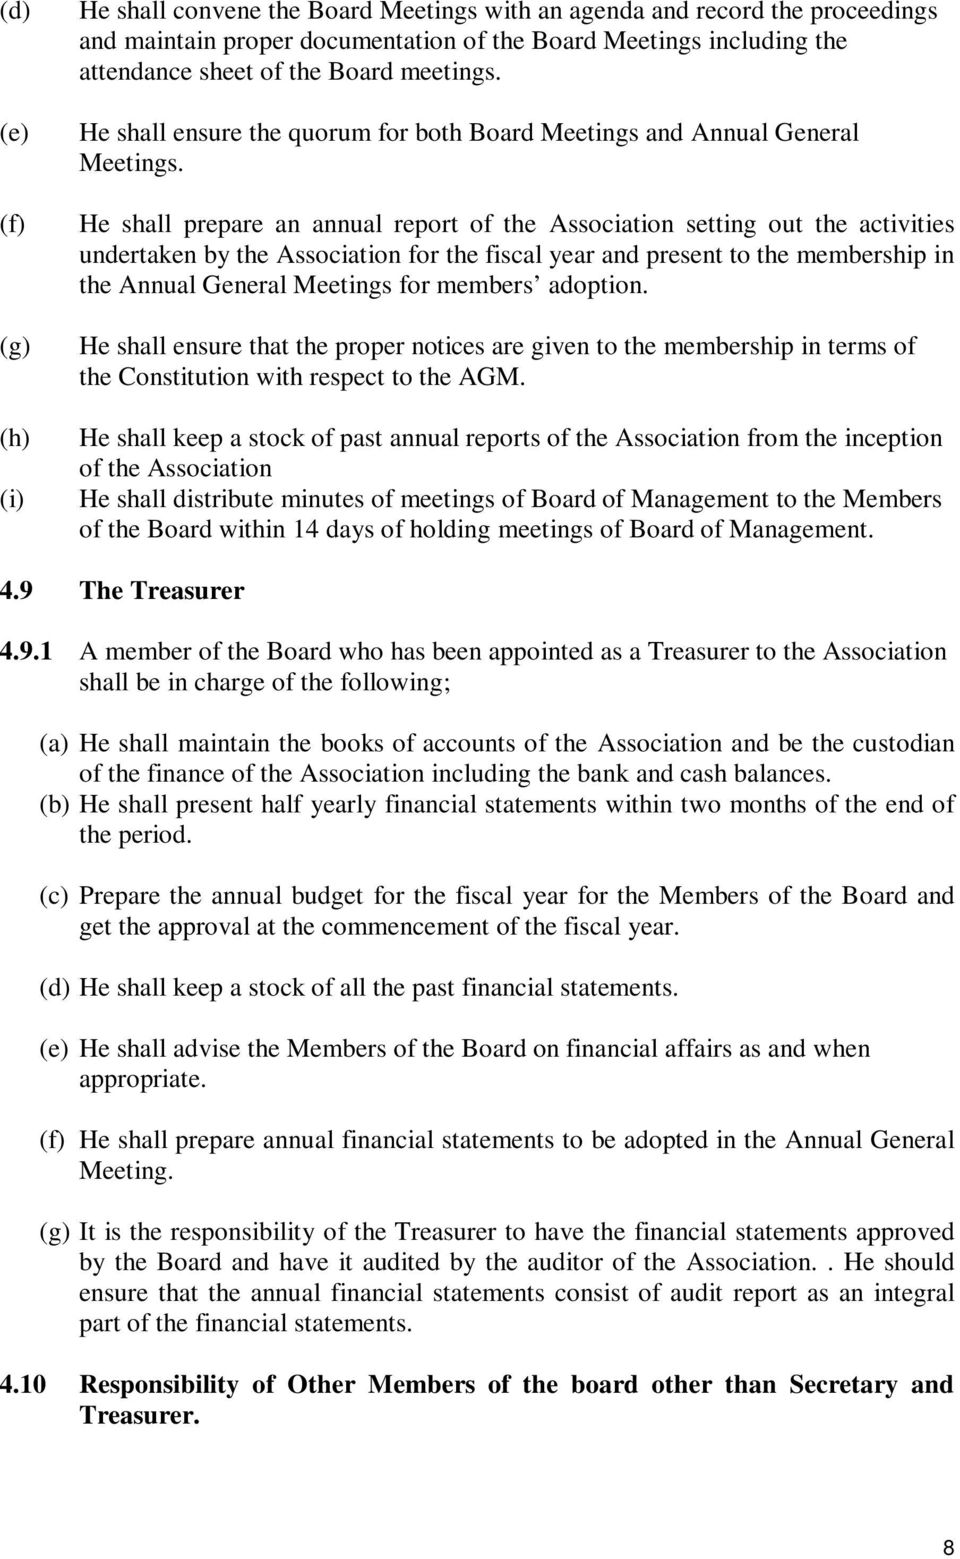 He shall prepare an annual report of the Association setting out the activities undertaken by the Association for the fiscal year and present to the membership in the Annual General Meetings for